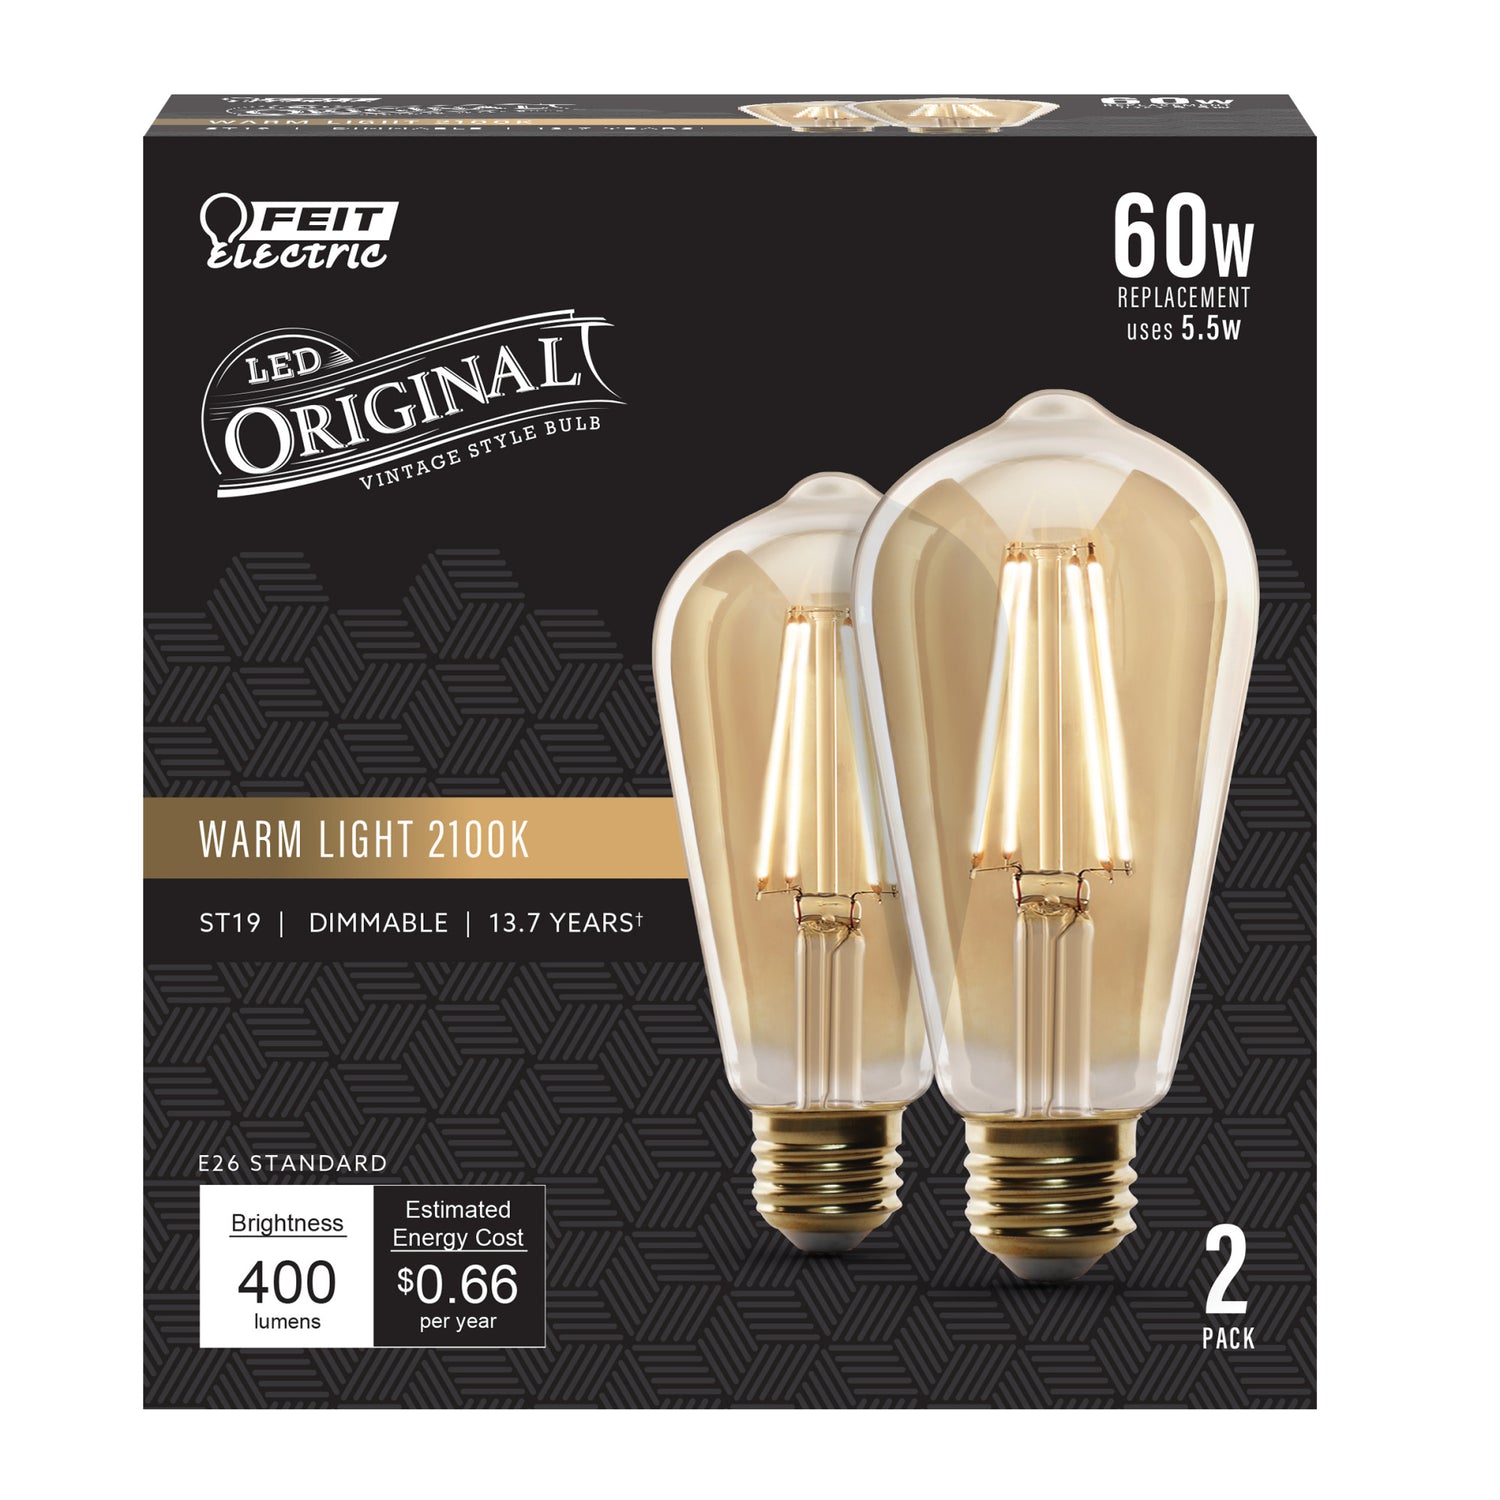 5.5W (60W Replacement) ST19 E26 Straight Filament Amber Glass Vintage Edison LED Light Bulb, Soft White (2-Pack)